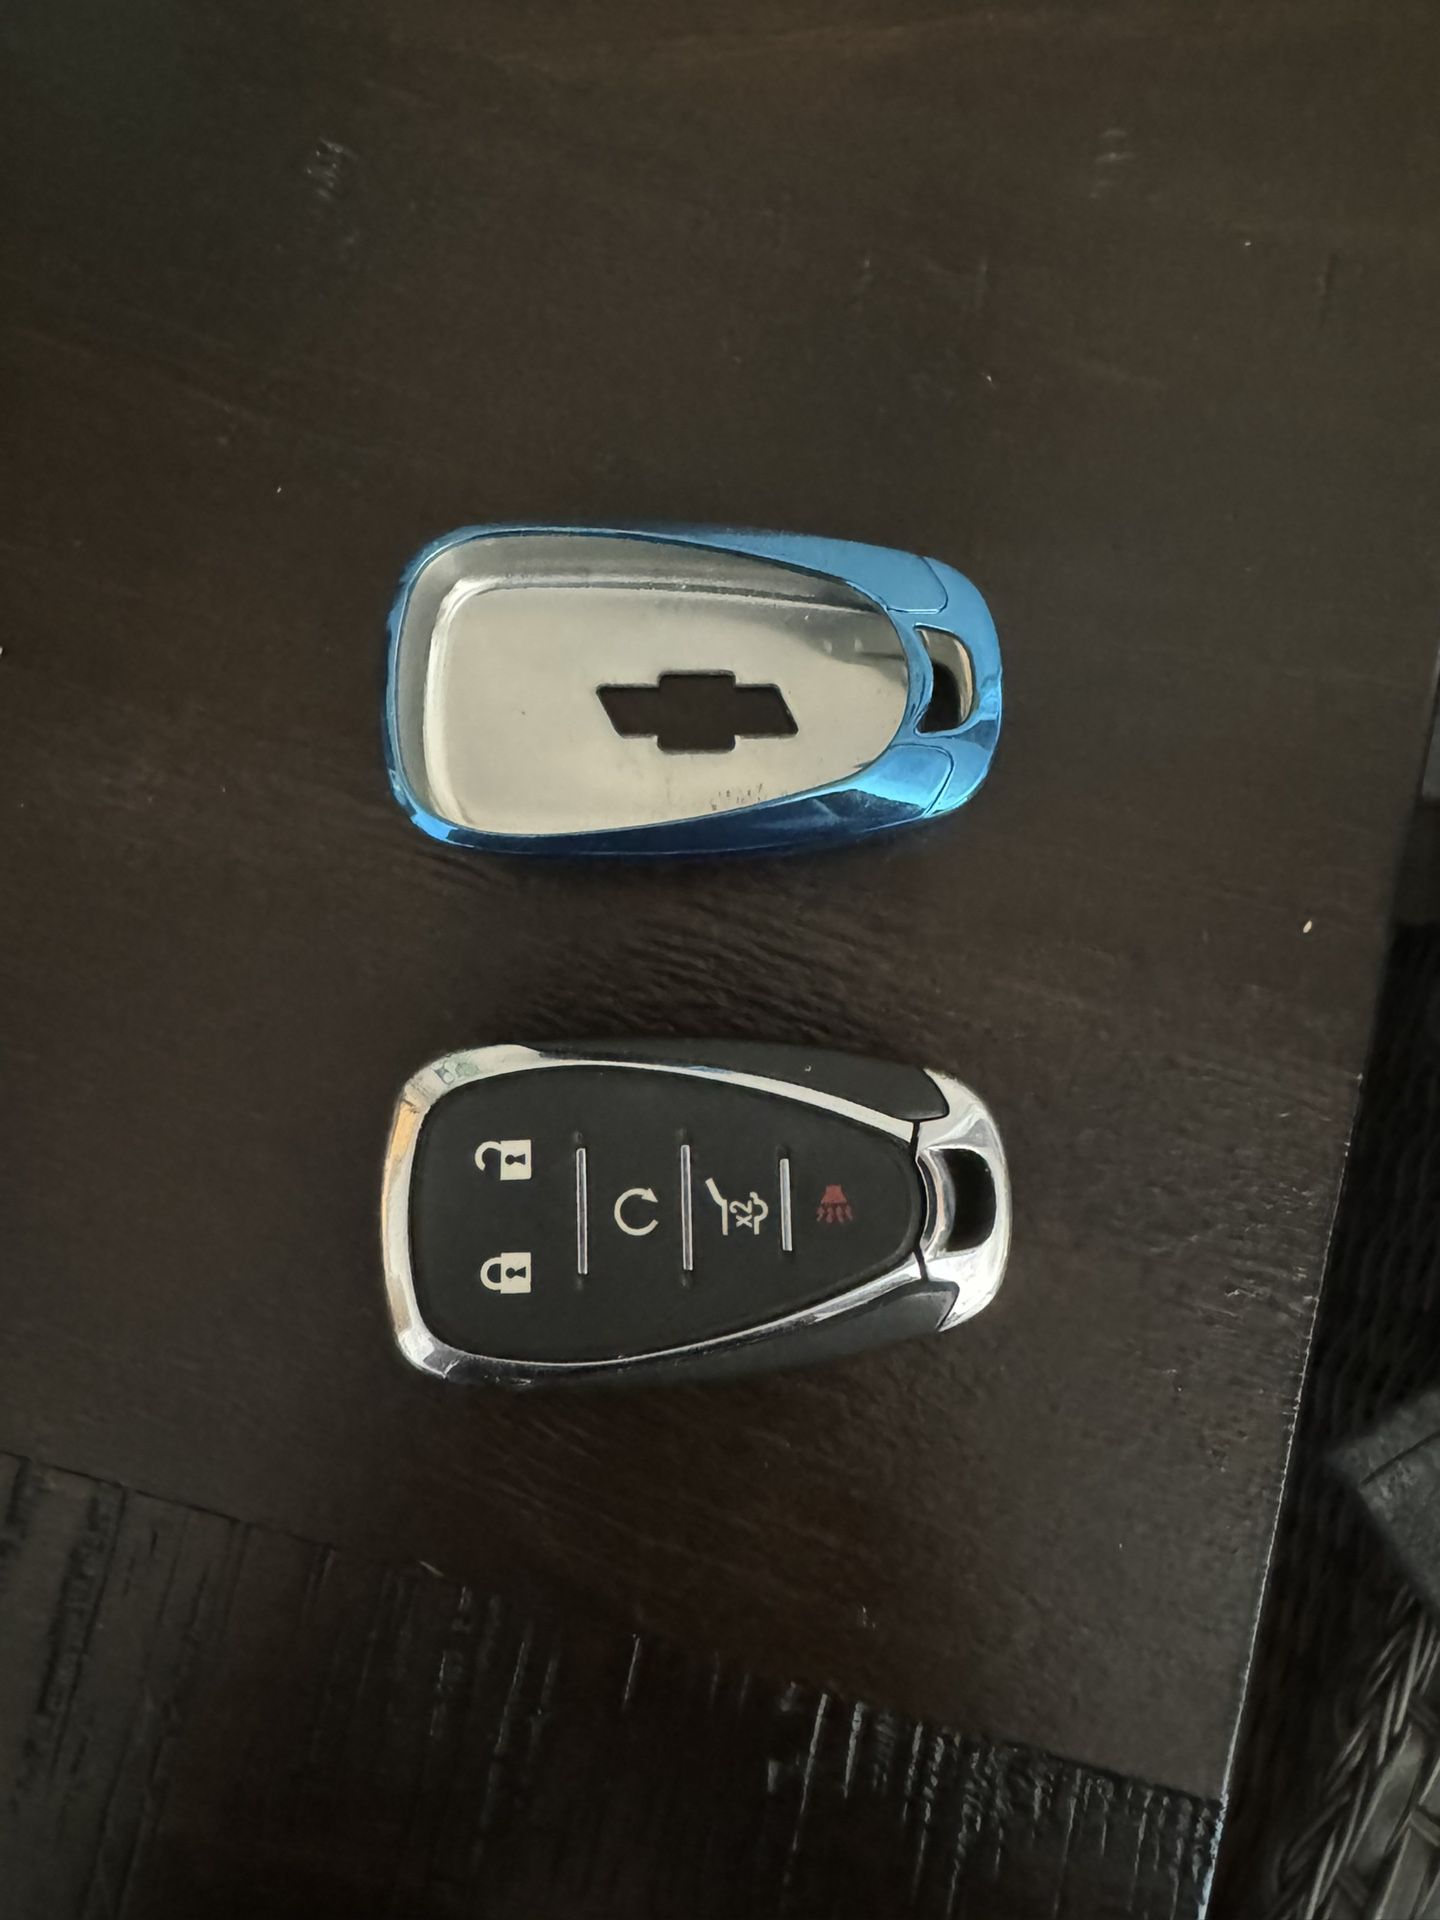 Chevy Key Fob And Case